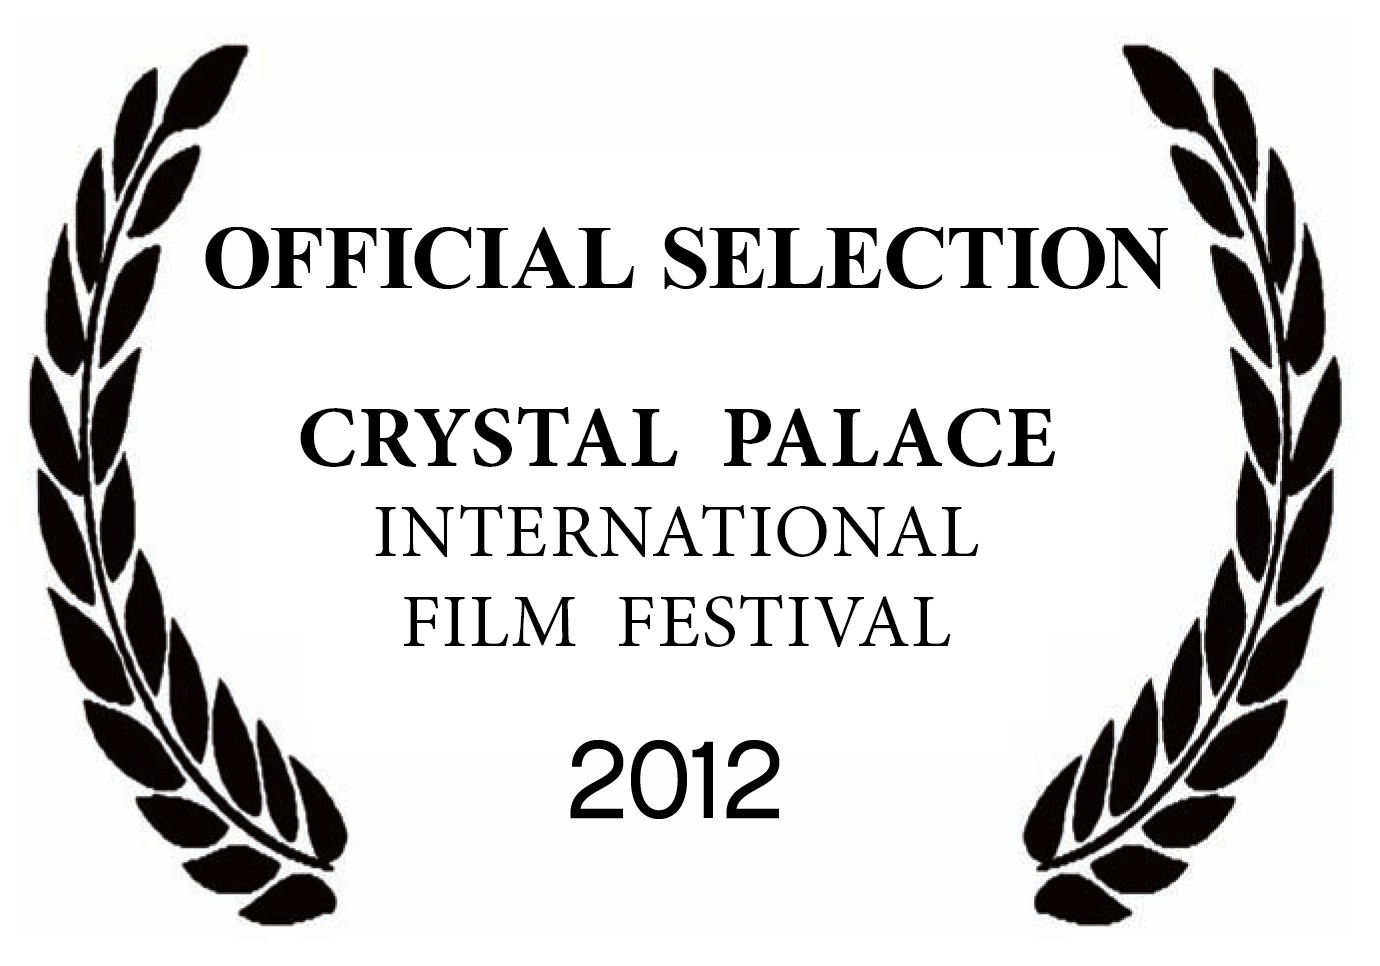 The Yellow Wallpaper has been selected and screened at Crystal Palace